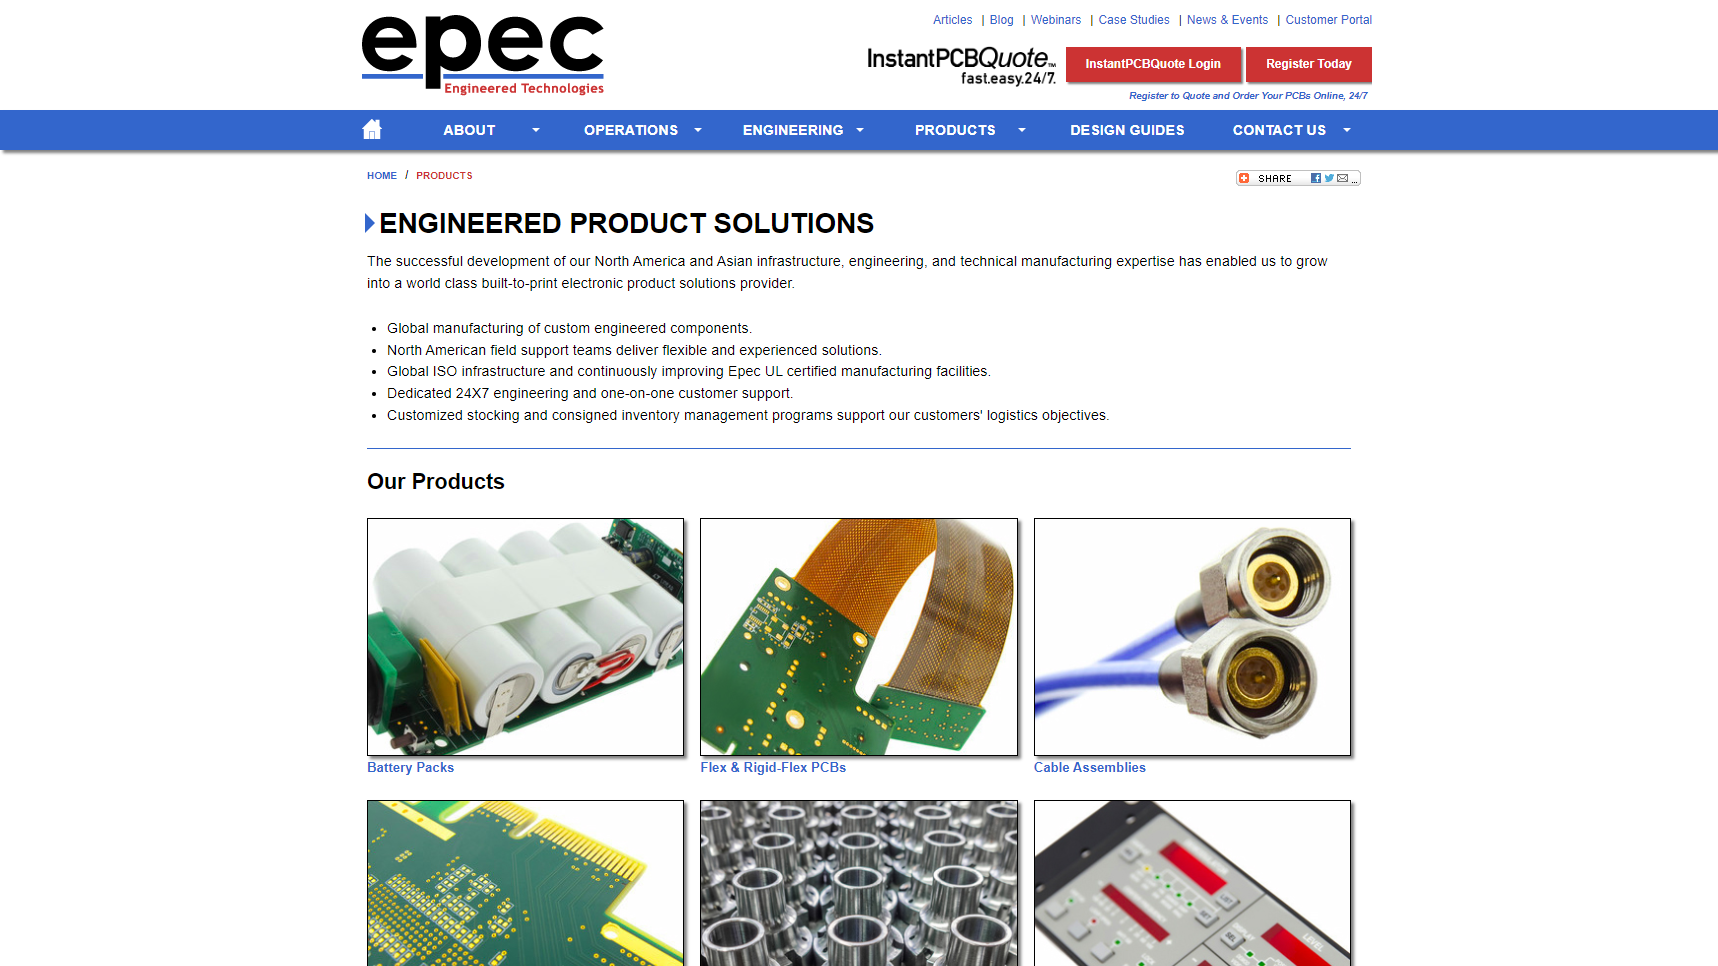 Epec Engineered Technologies - Circuit Board Manufacturer